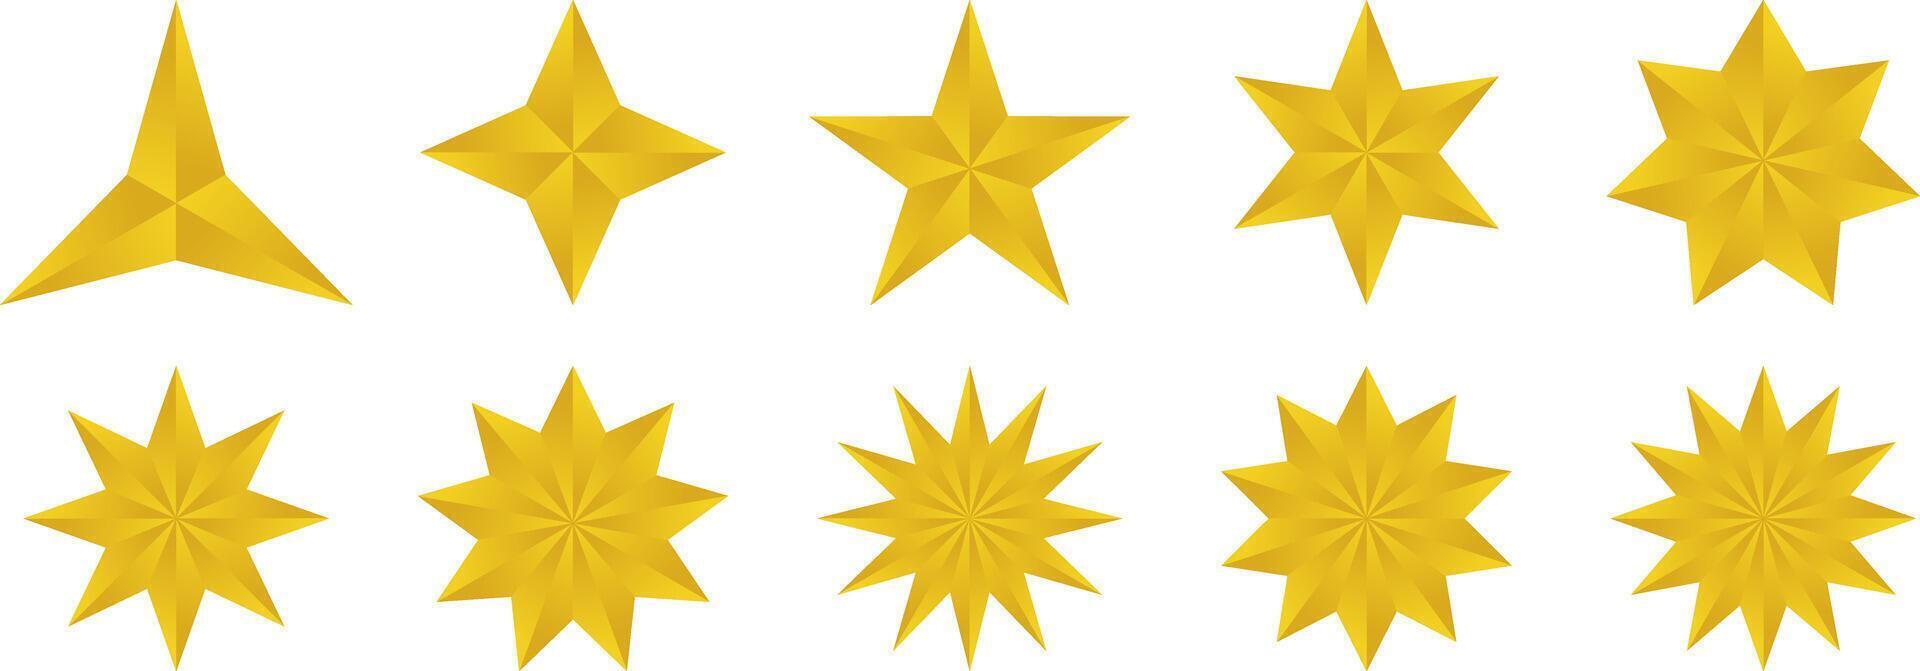 icon set of gold stars, light symbols. luxury vector isolated on white background. ornament design for greeting cards, posters, web, social media.